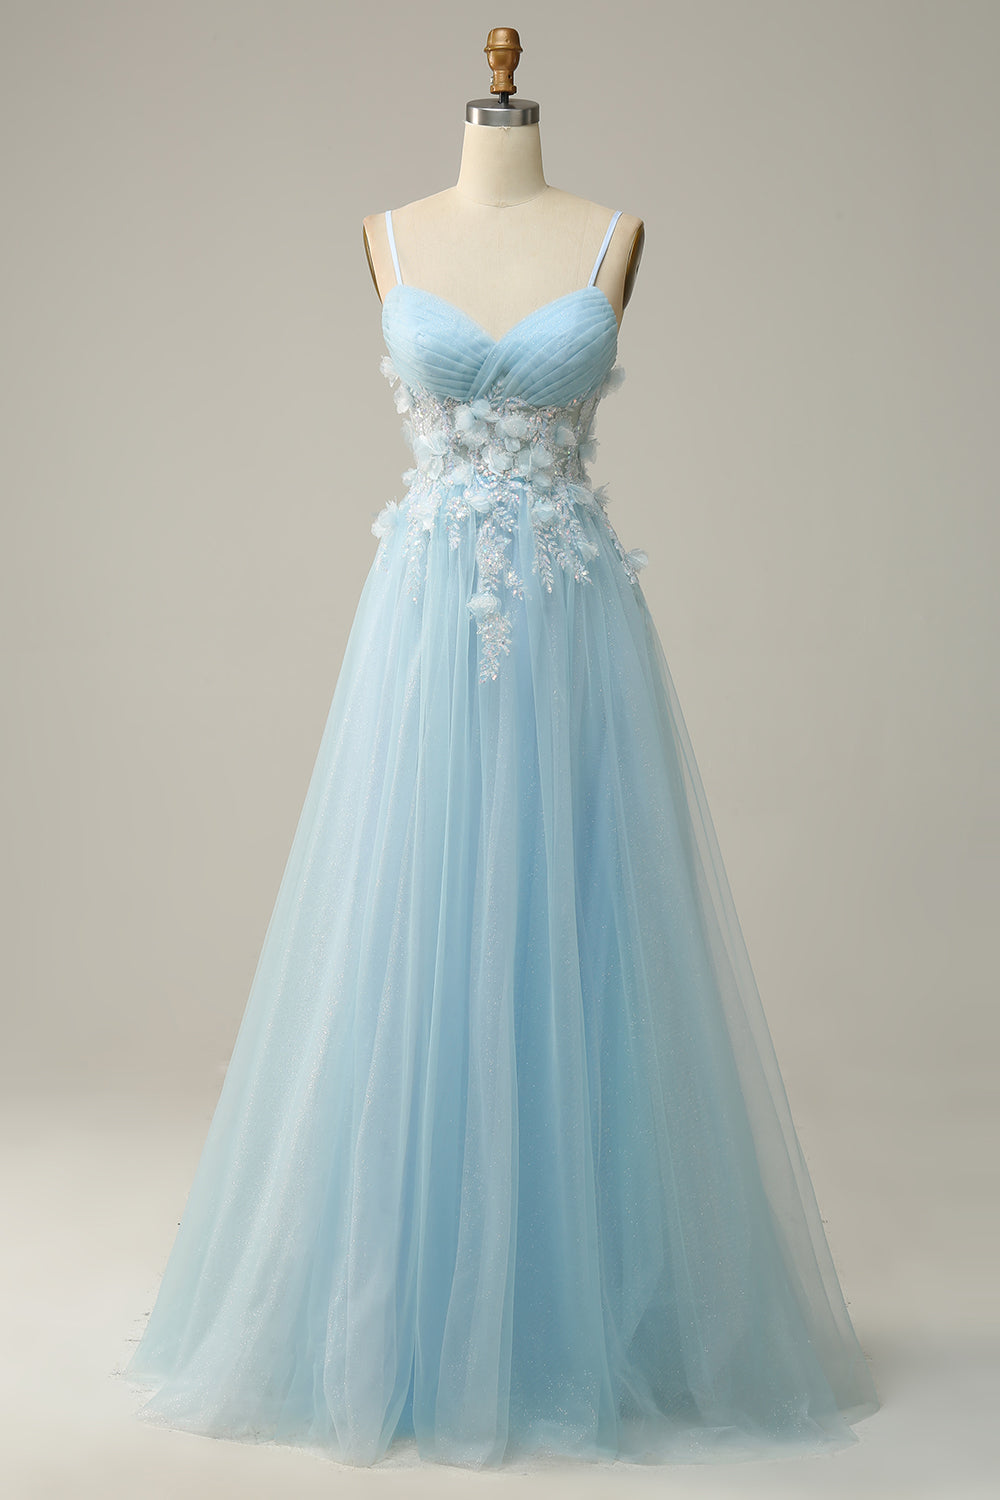 ZAPAKA Women Light Blue Corset Prom Dress with Appliques A-Line